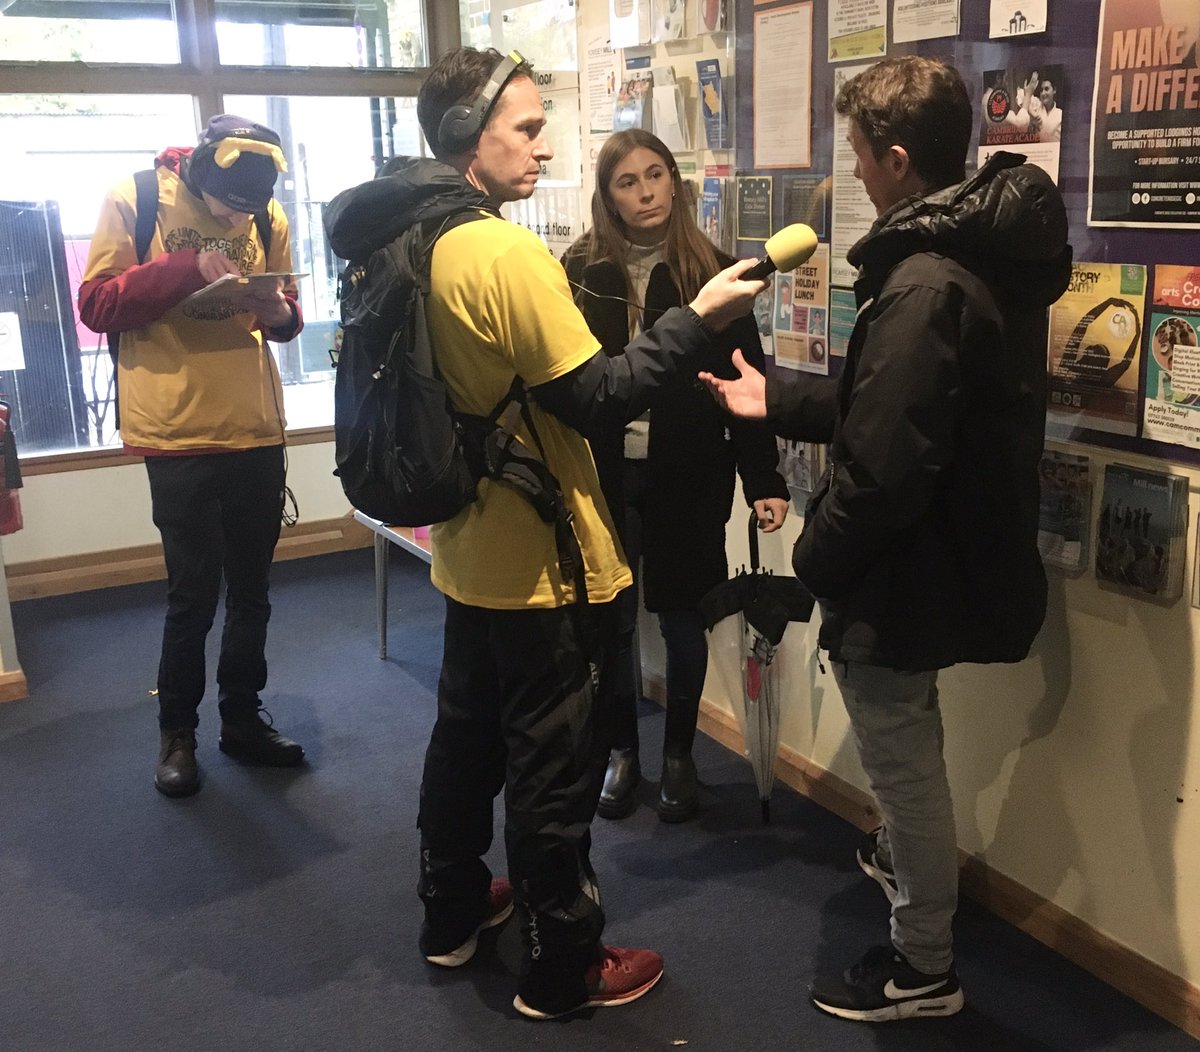 Great to welcome @jeremysallis & @sebnoble on their walk & talk yesterday to speak about the positive impact of funding from @BBCCiN on young lives in north Cambridge. Hear their interview with our team at 3hr10m: bbc.co.uk/sounds/play/p0…